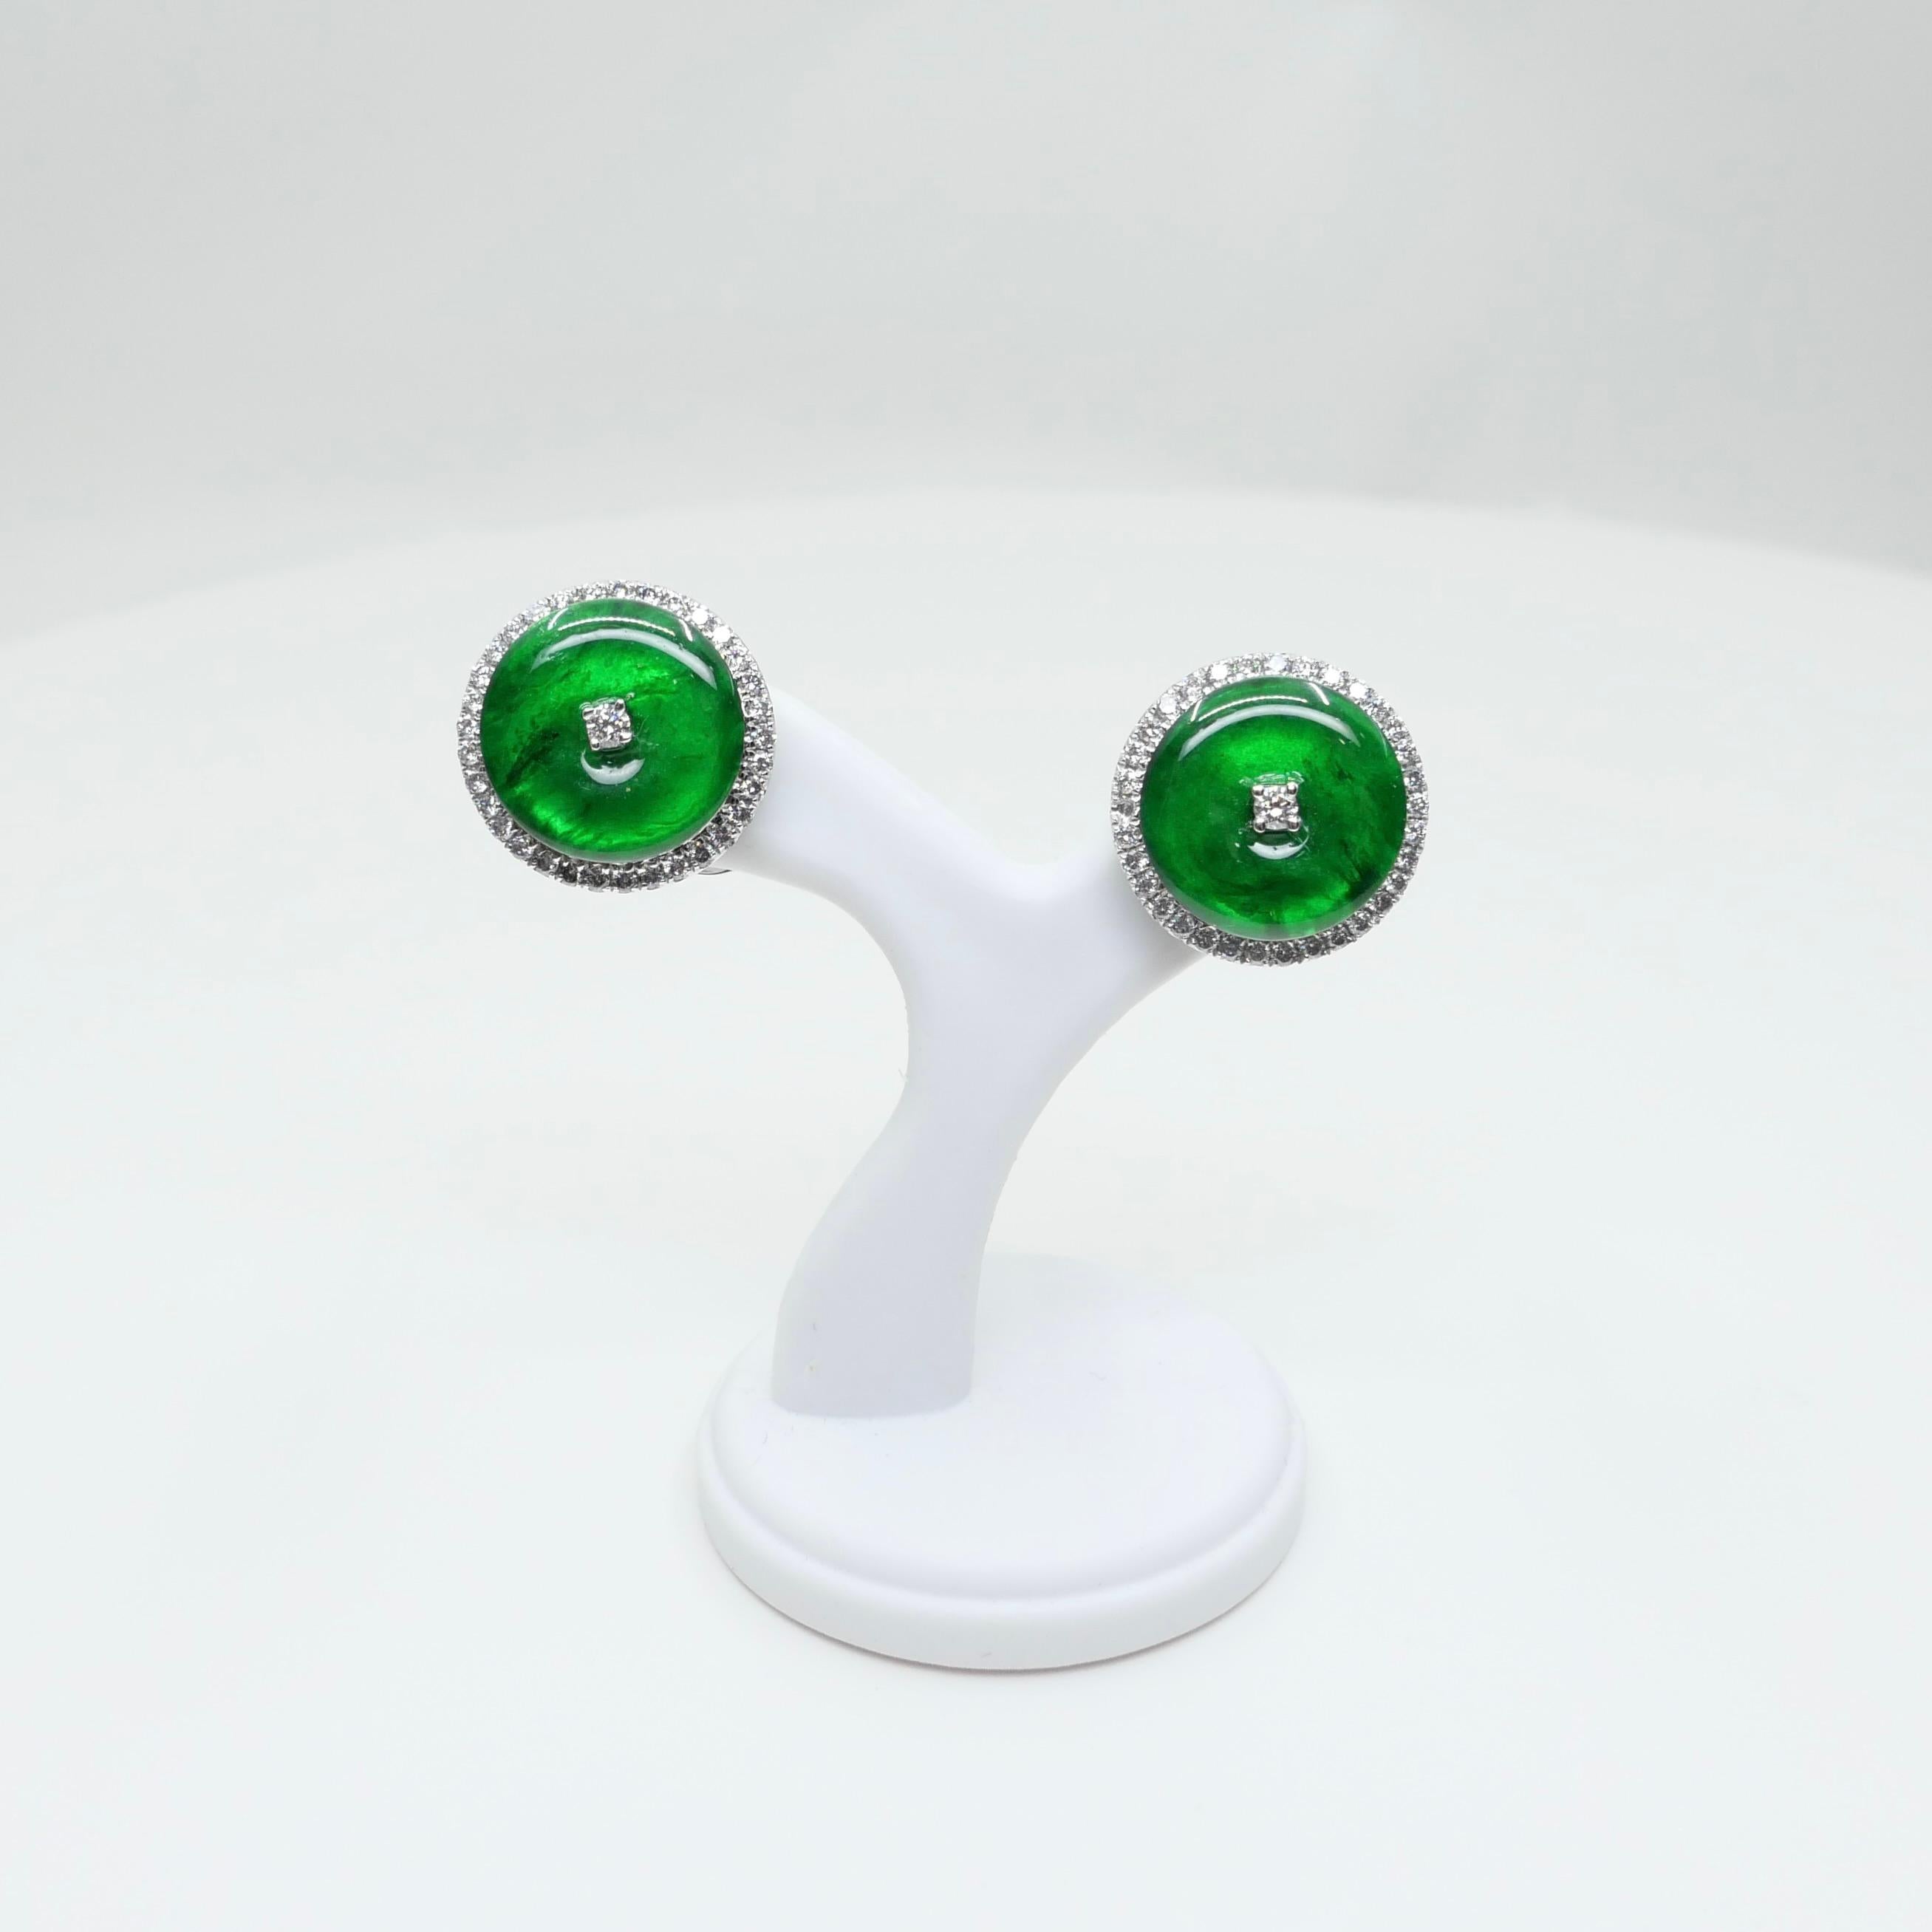 Certified Natural Type A Jadeite Jade And Diamond Earrings. Apple Green Color For Sale 7